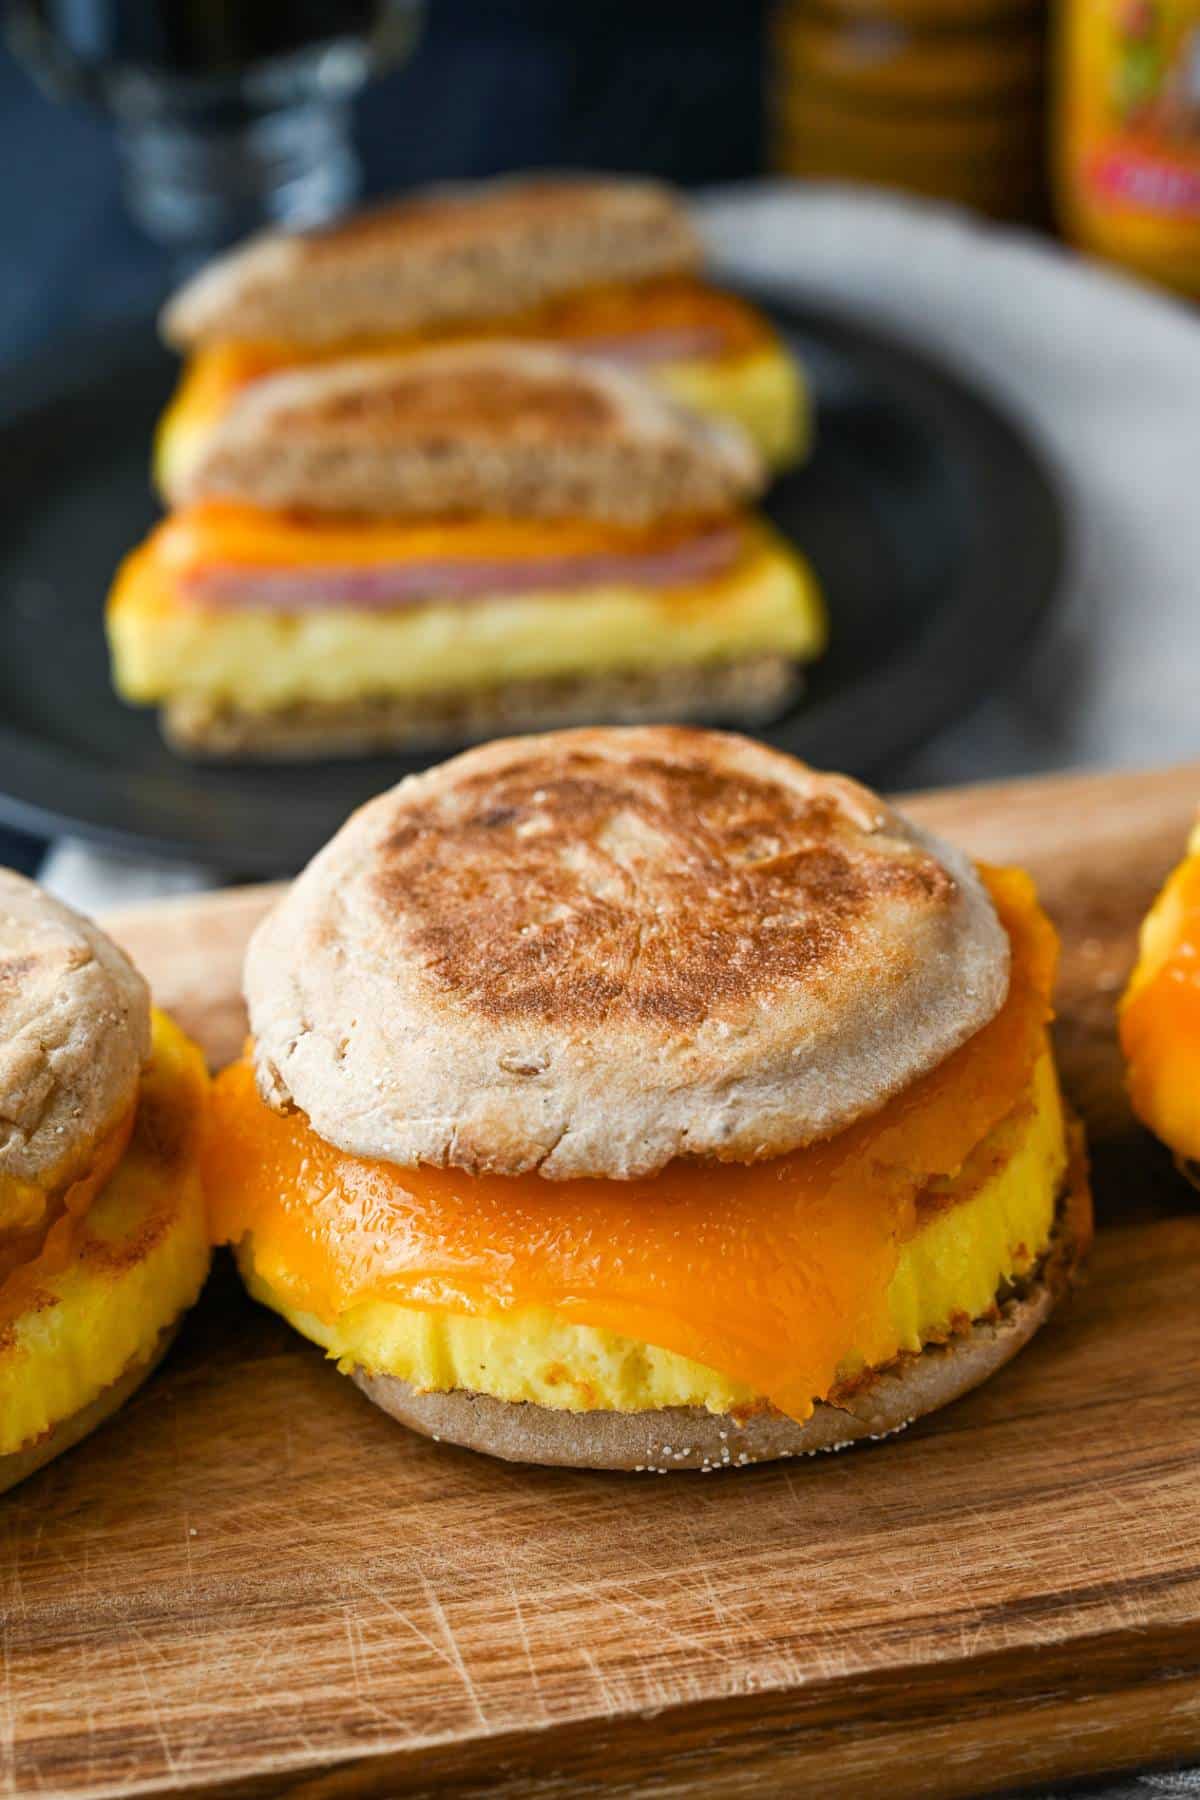 zoomed in on a healthy egg muffin breakfast sandwich with melting cheese and a sliced sandwich behind it